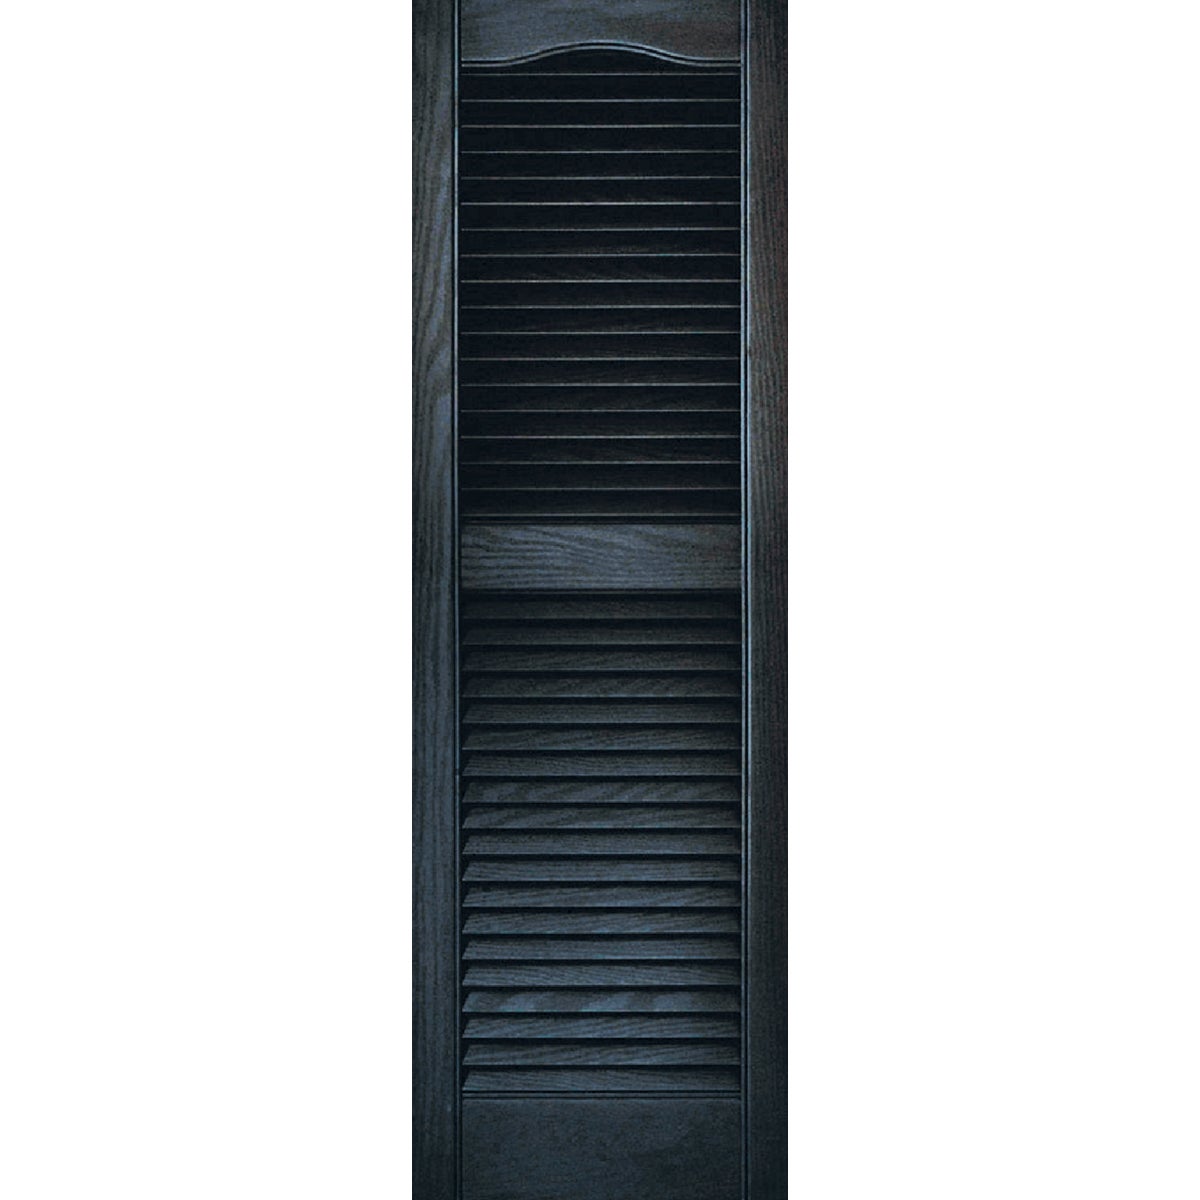 Item 160970, All shutters open louvered cathedral top with center rail and 15" wide.